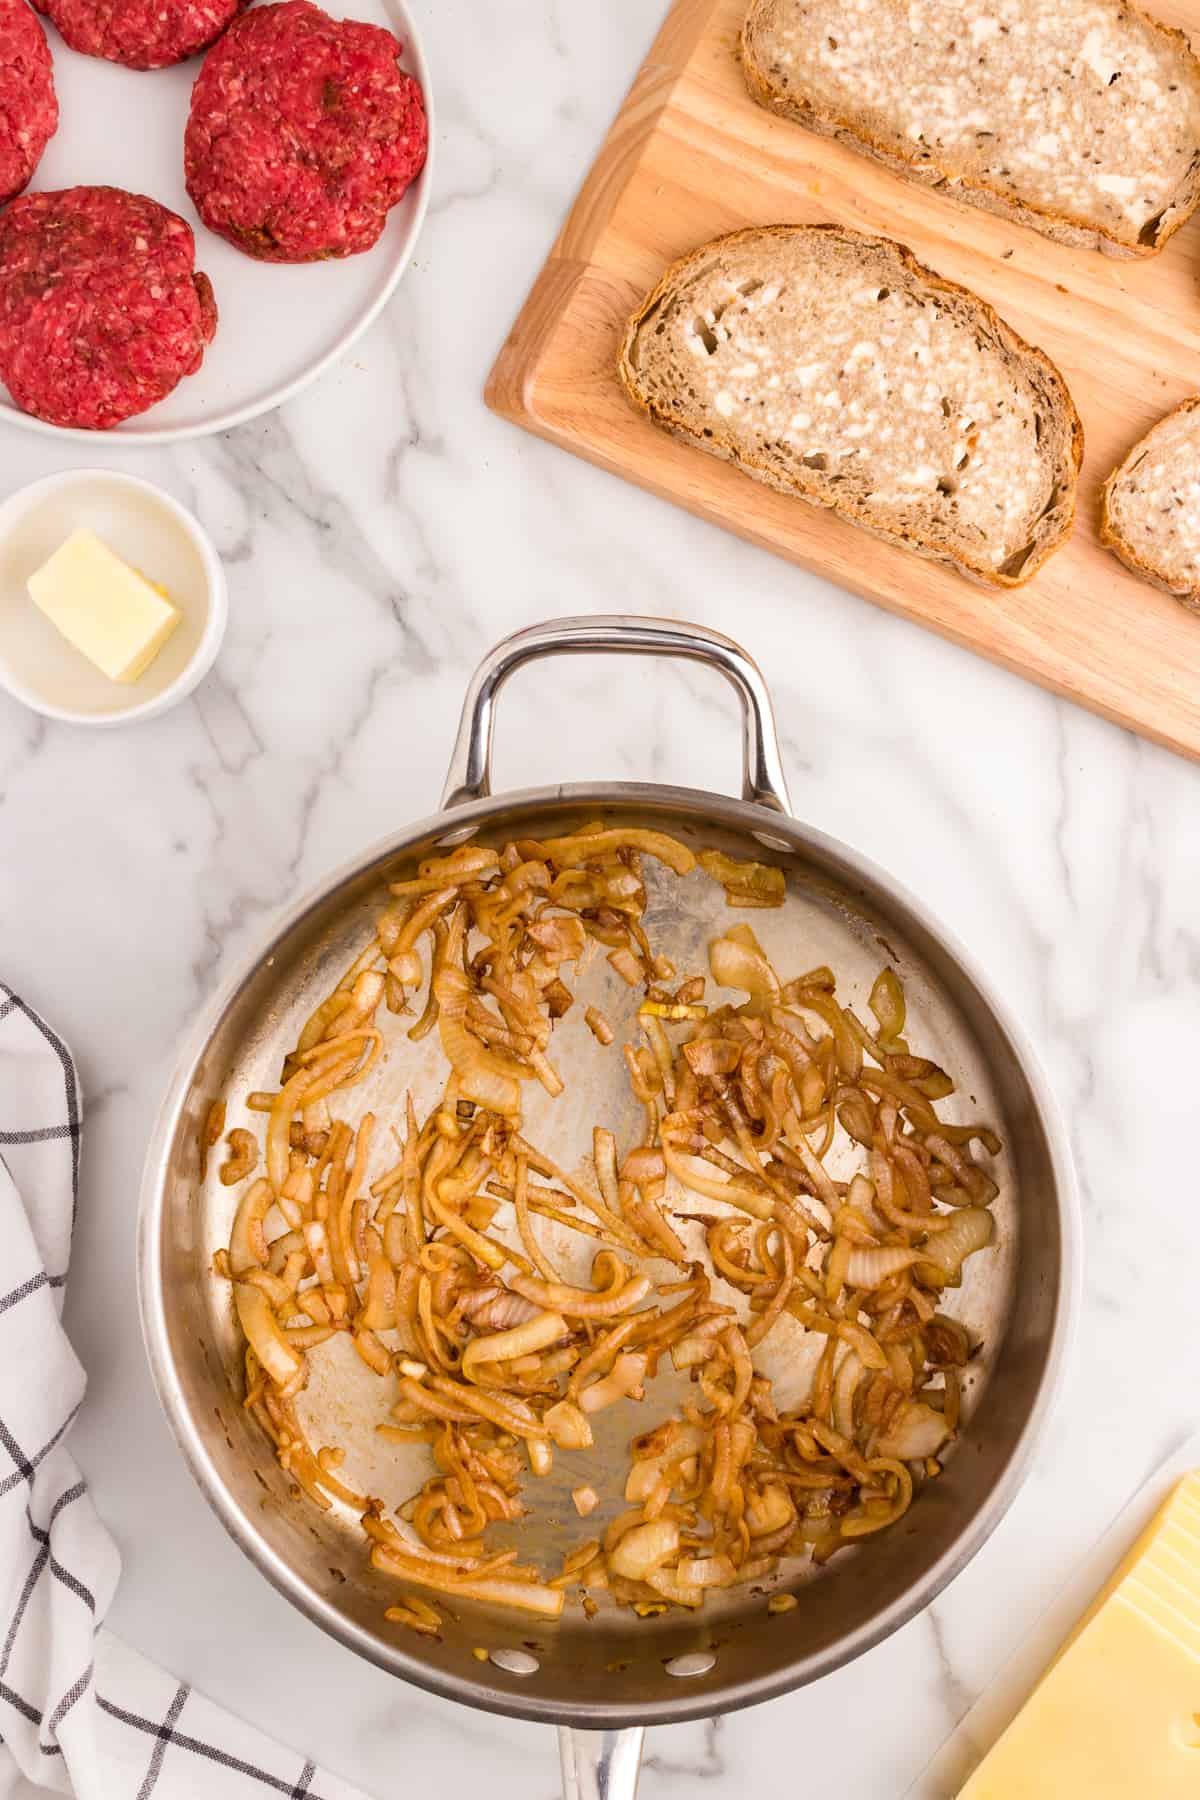 Cooking onions in stovetop skillet for Patty Melts